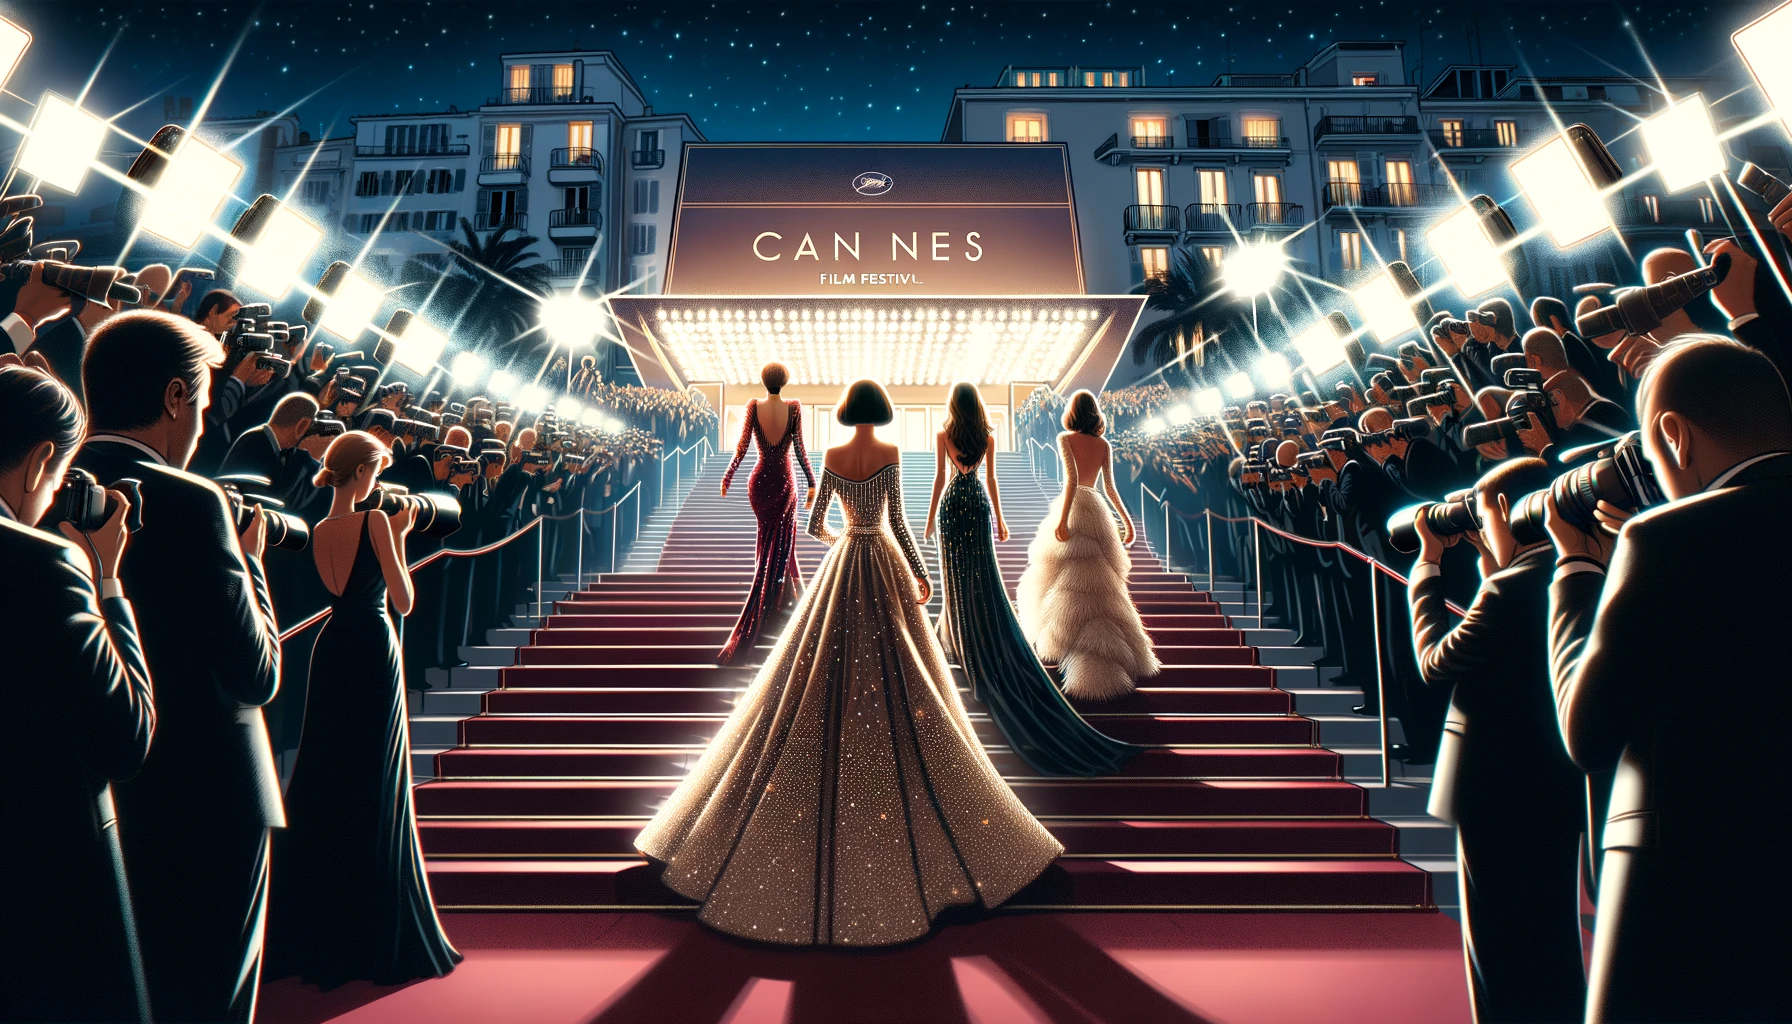 Starlets in haute couture dresses ascend the steps of Cannes